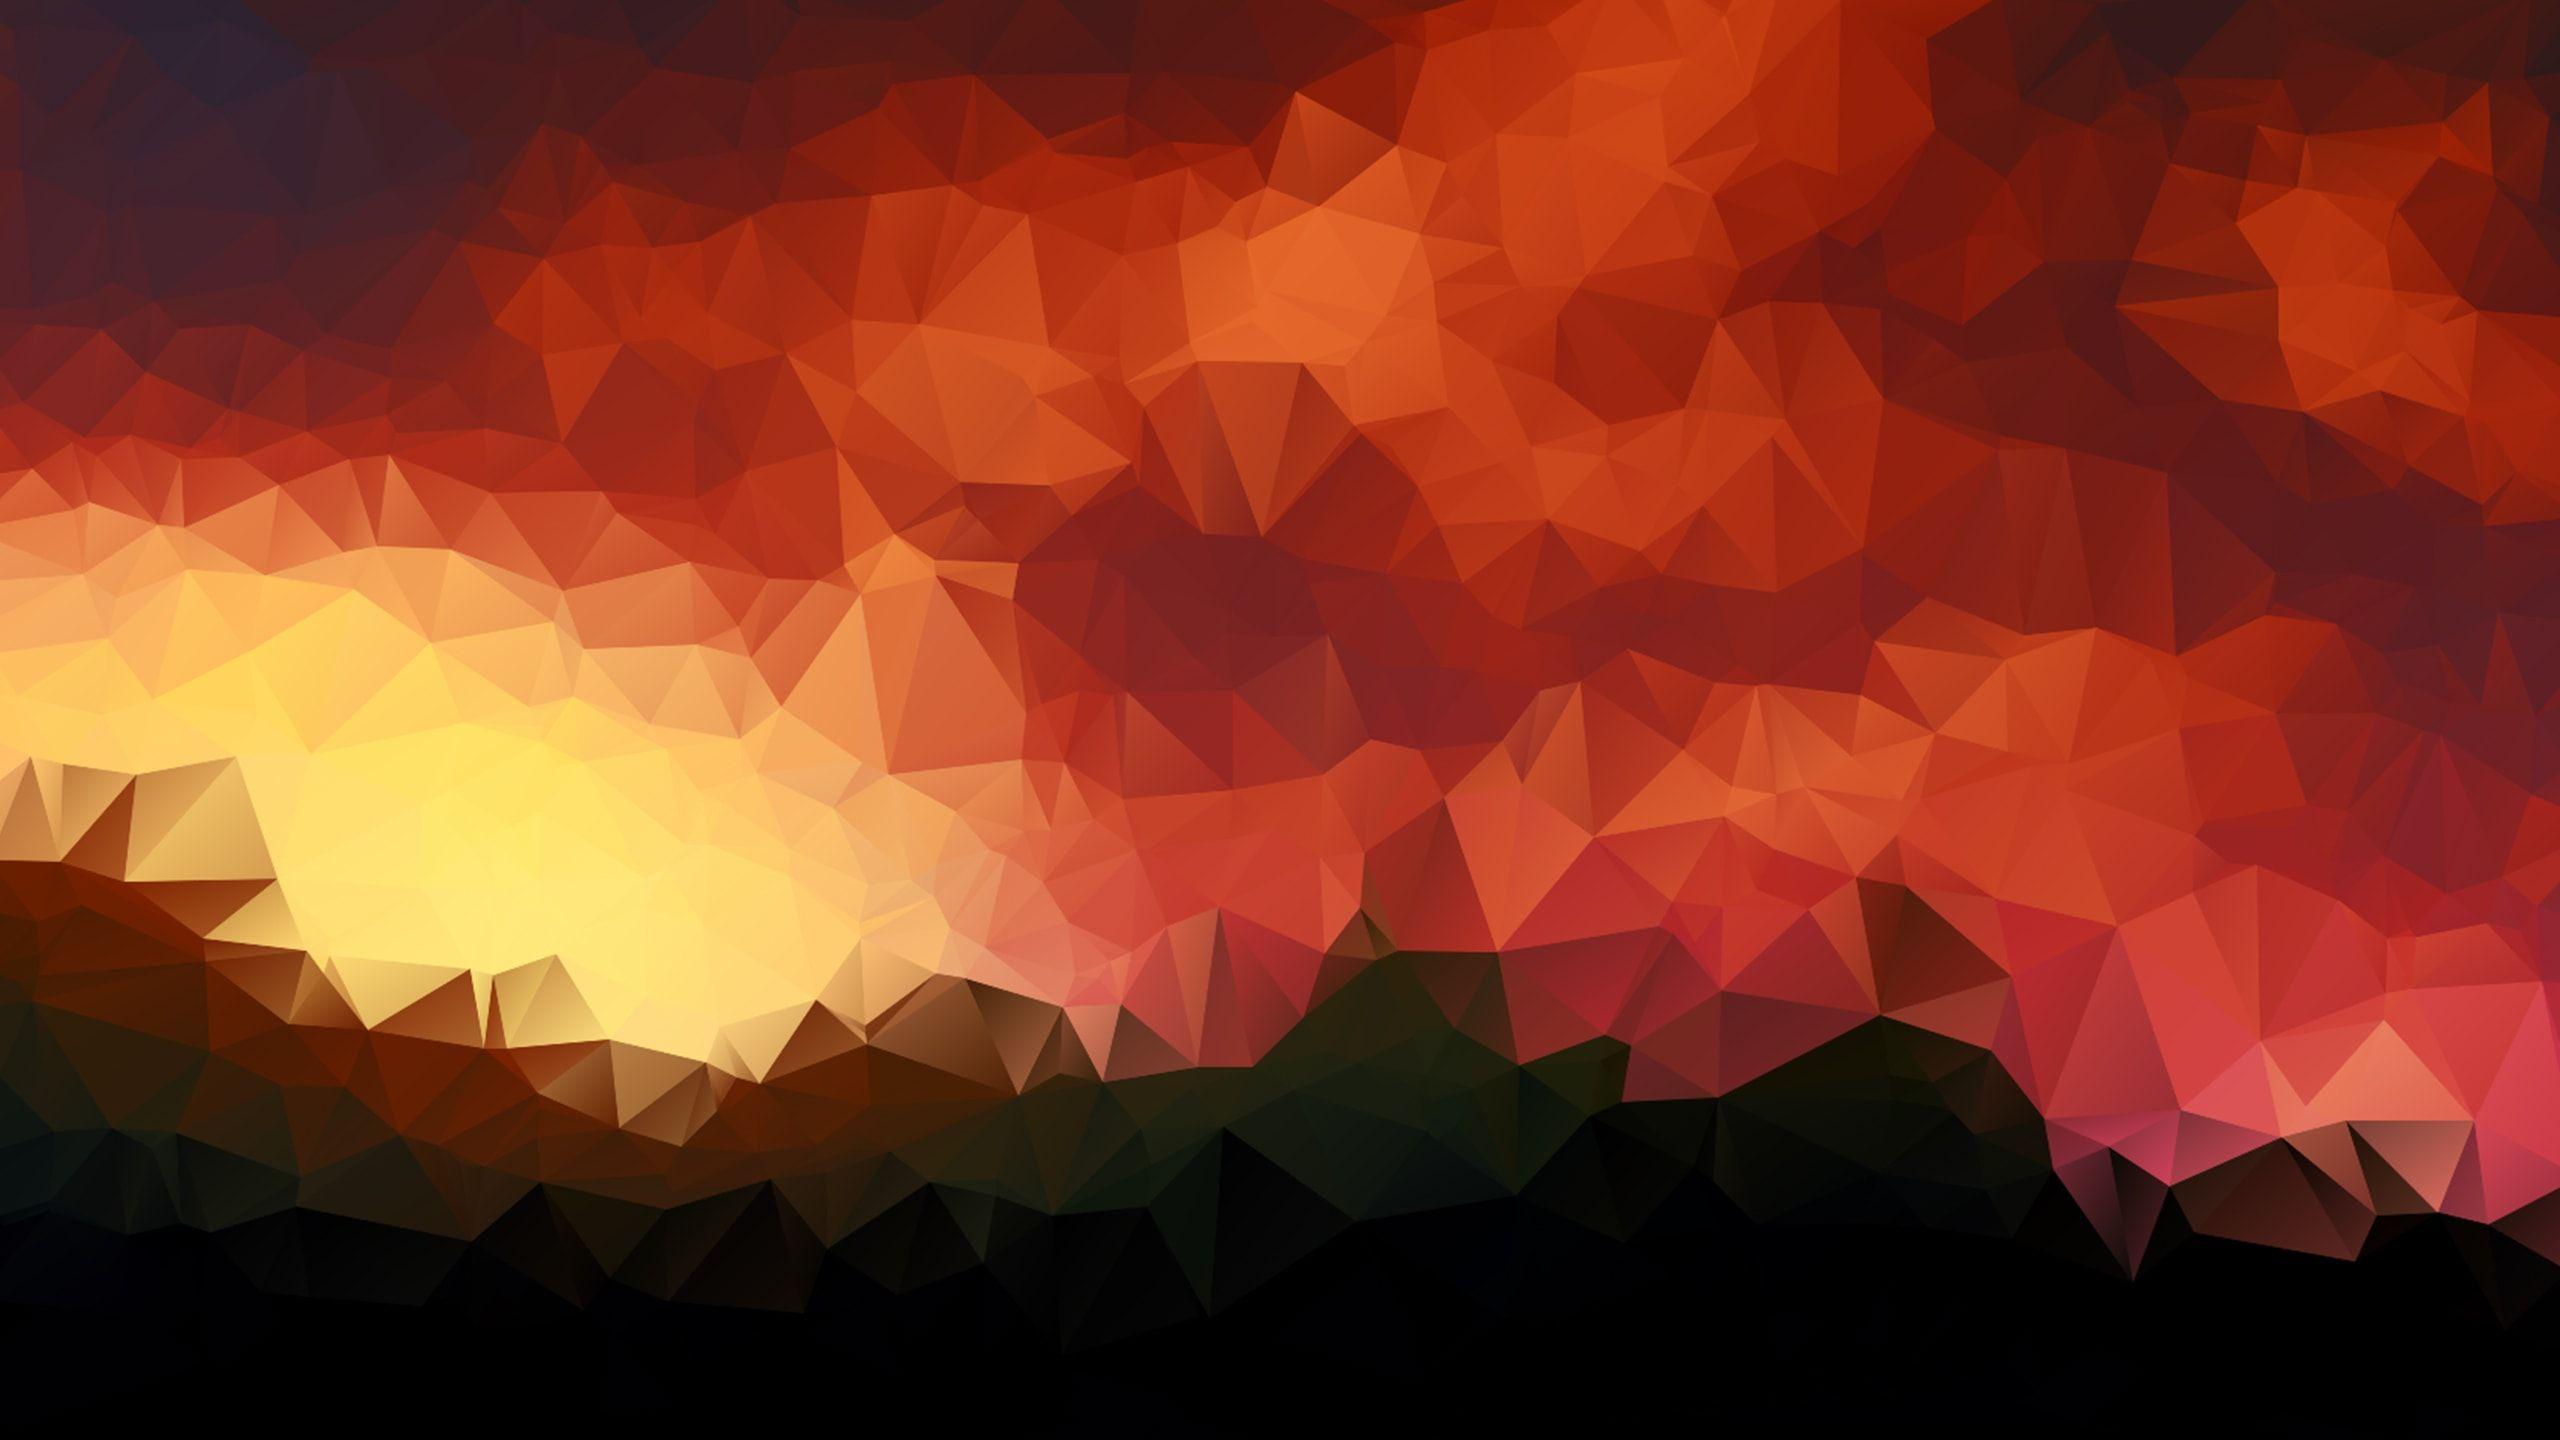 Orange Polygon Wallpapers Top Free Orange Polygon Backgrounds Images, Photos, Reviews